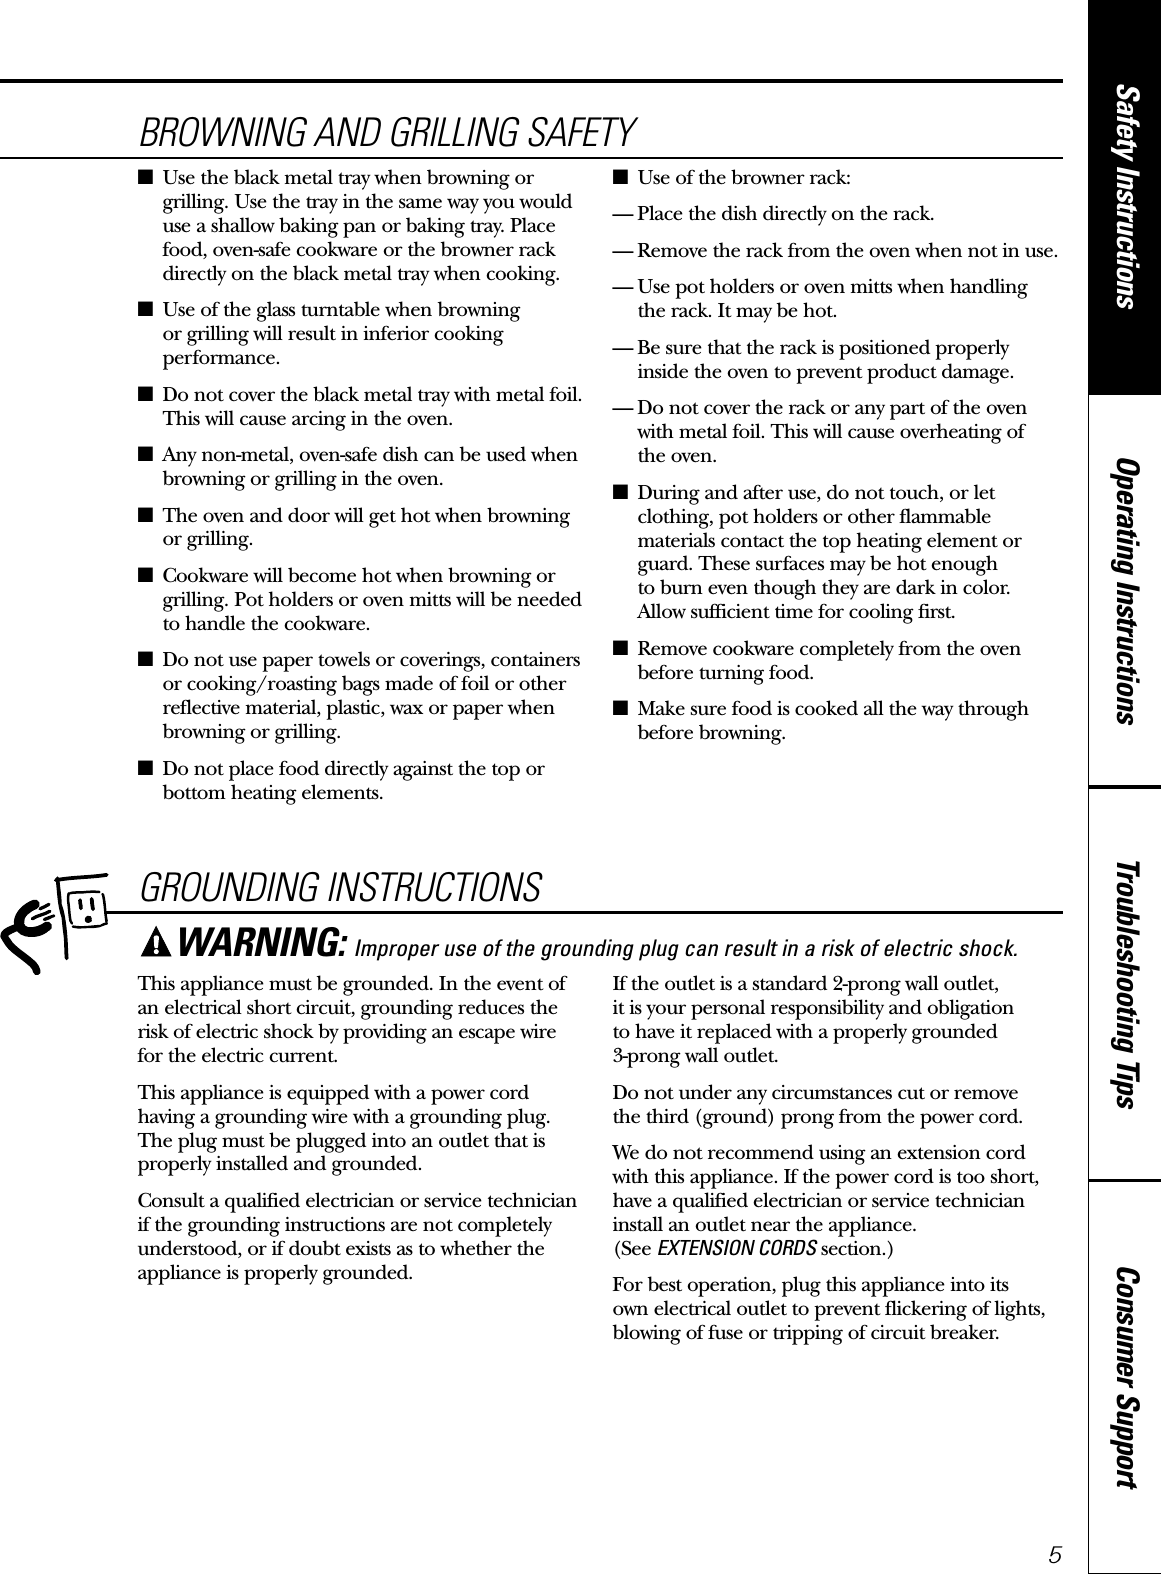 Consumer SupportTroubleshooting TipsOperating InstructionsSafety Instructions5GROUNDING INSTRUCTIONSThis appliance must be grounded. In the event ofan electrical short circuit, grounding reduces therisk of electric shock by providing an escape wire for the electric current. This appliance is equipped with a power cordhaving a grounding wire with a grounding plug.The plug must be plugged into an outlet that isproperly installed and grounded.Consult a qualified electrician or service technicianif the grounding instructions are not completelyunderstood, or if doubt exists as to whether theappliance is properly grounded.If the outlet is a standard 2-prong wall outlet, it is your personal responsibility and obligation to have it replaced with a properly grounded 3-prong wall outlet.Do not under any circumstances cut or remove the third (ground) prong from the power cord.We do not recommend using an extension cordwith this appliance. If the power cord is too short,have a qualified electrician or service technicianinstall an outlet near the appliance. (See EXTENSION CORDS section.)For best operation, plug this appliance into its own electrical outlet to prevent flickering of lights,blowing of fuse or tripping of circuit breaker.WARNING: Improper use of the grounding plug can result in a risk of electric shock.BROWNING AND GRILLING SAFETY■Use the black metal tray when browning orgrilling. Use the tray in the same way you woulduse a shallow baking pan or baking tray. Placefood, oven-safe cookware or the browner rackdirectly on the black metal tray when cooking.■Use of the glass turntable when browning or grilling will result in inferior cookingperformance.■Do not cover the black metal tray with metal foil.This will cause arcing in the oven.■Any non-metal, oven-safe dish can be used whenbrowning or grilling in the oven.■The oven and door will get hot when browningor grilling.■Cookware will become hot when browning orgrilling. Pot holders or oven mitts will be neededto handle the cookware.■Do not use paper towels or coverings, containersor cooking/roasting bags made of foil or otherreflective material, plastic, wax or paper whenbrowning or grilling.■Do not place food directly against the top orbottom heating elements.■Use of the browner rack:— Place the dish directly on the rack.— Remove the rack from the oven when not in use.— Use pot holders or oven mitts when handling the rack. It may be hot.— Be sure that the rack is positioned properly inside the oven to prevent product damage.— Do not cover the rack or any part of the ovenwith metal foil. This will cause overheating of the oven.■During and after use, do not touch, or letclothing, pot holders or other flammablematerials contact the top heating element orguard. These surfaces may be hot enough to burn even though they are dark in color. Allow sufficient time for cooling first.■Remove cookware completely from the ovenbefore turning food.■Make sure food is cooked all the way throughbefore browning.